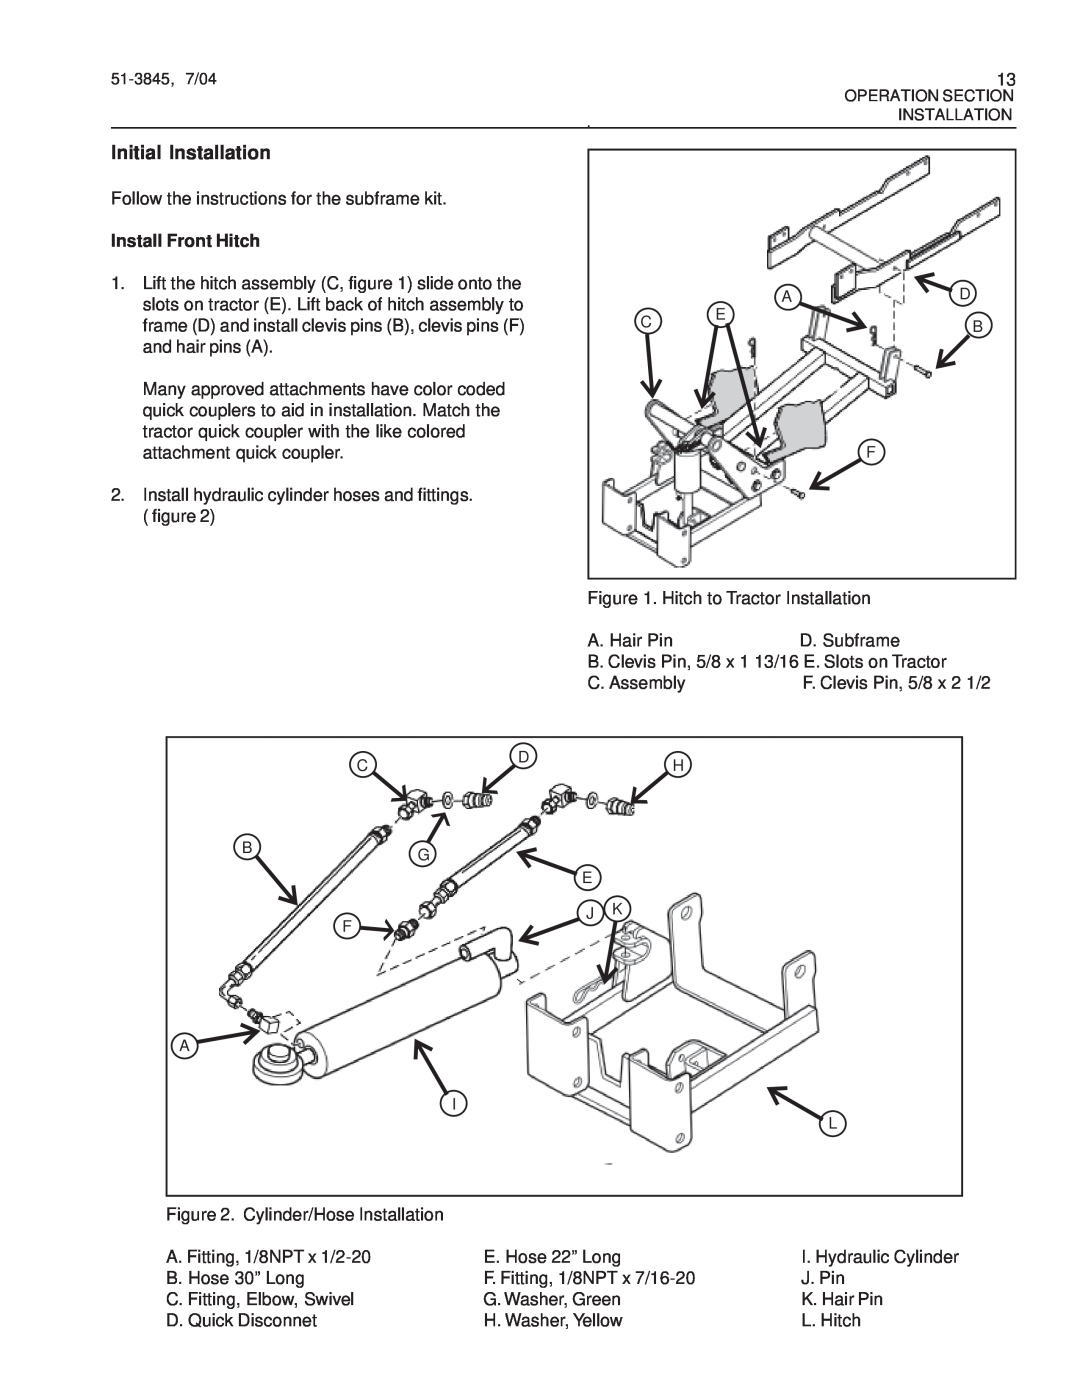 Snapper 151-3845, M26 Series manual Initial Installation, Install Front Hitch 